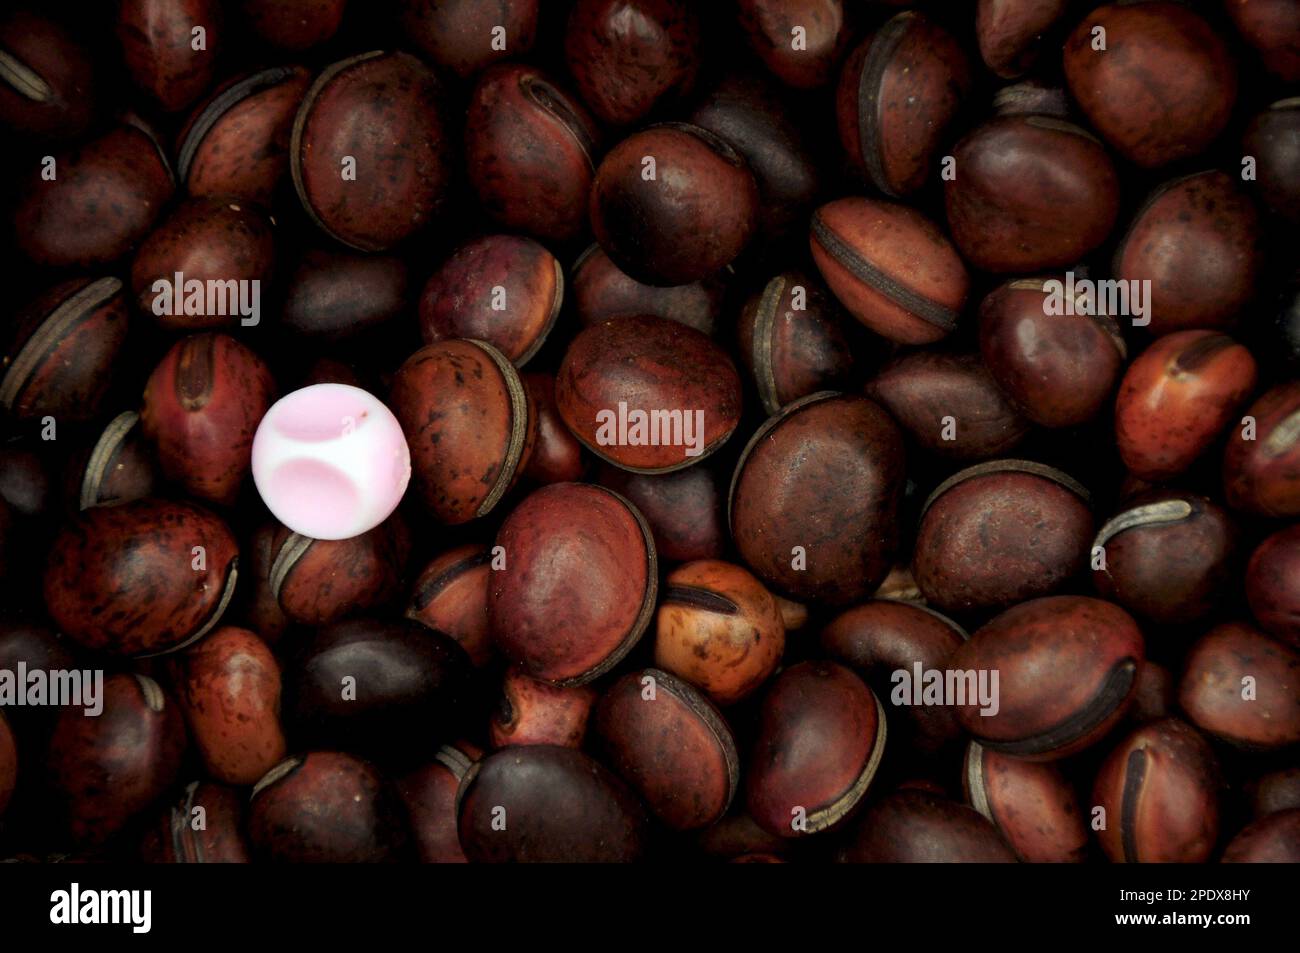 Background full of canavalia bonariensis seeds and a pink colored marble on them Stock Photo